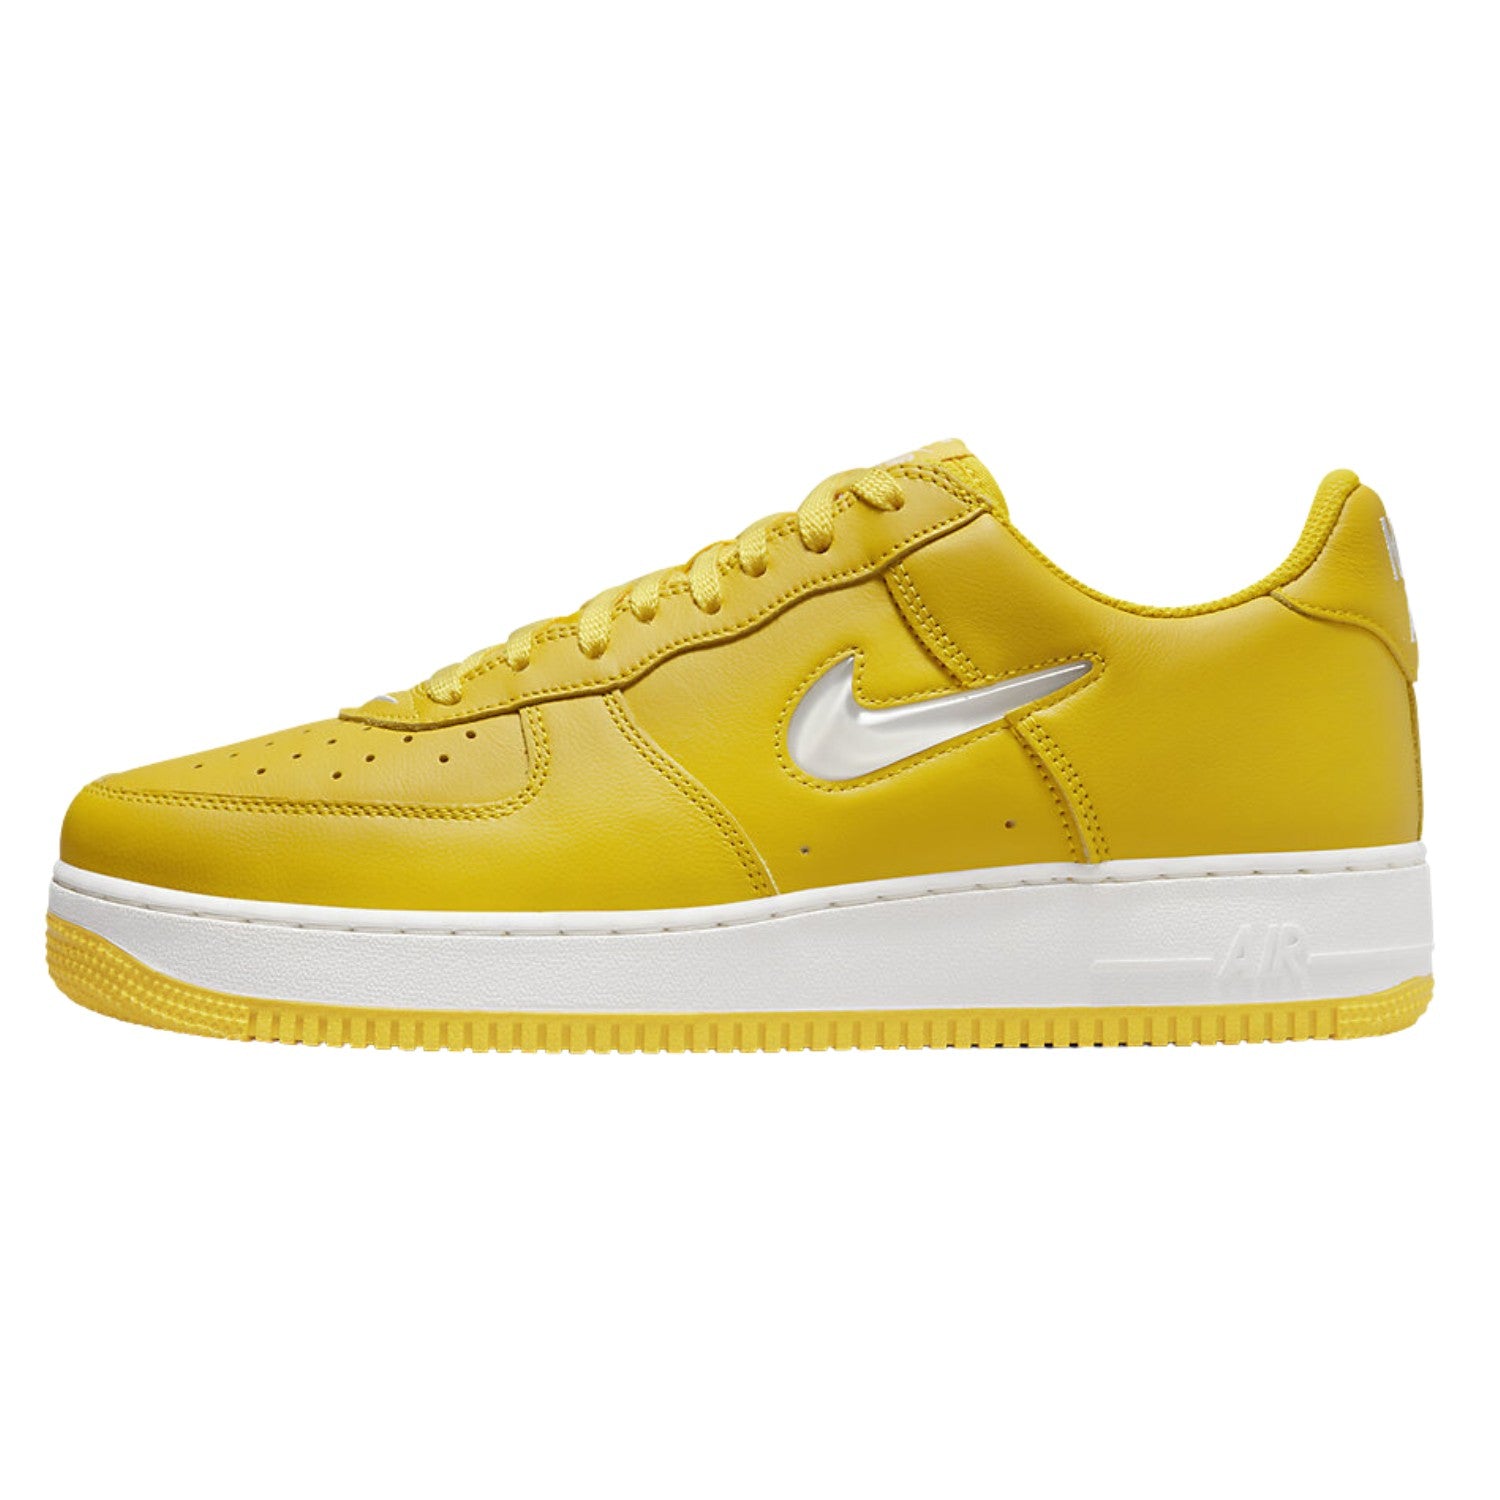 Nike Air Force 1 Low '07 Retro Color of the Month Yellow Jewel